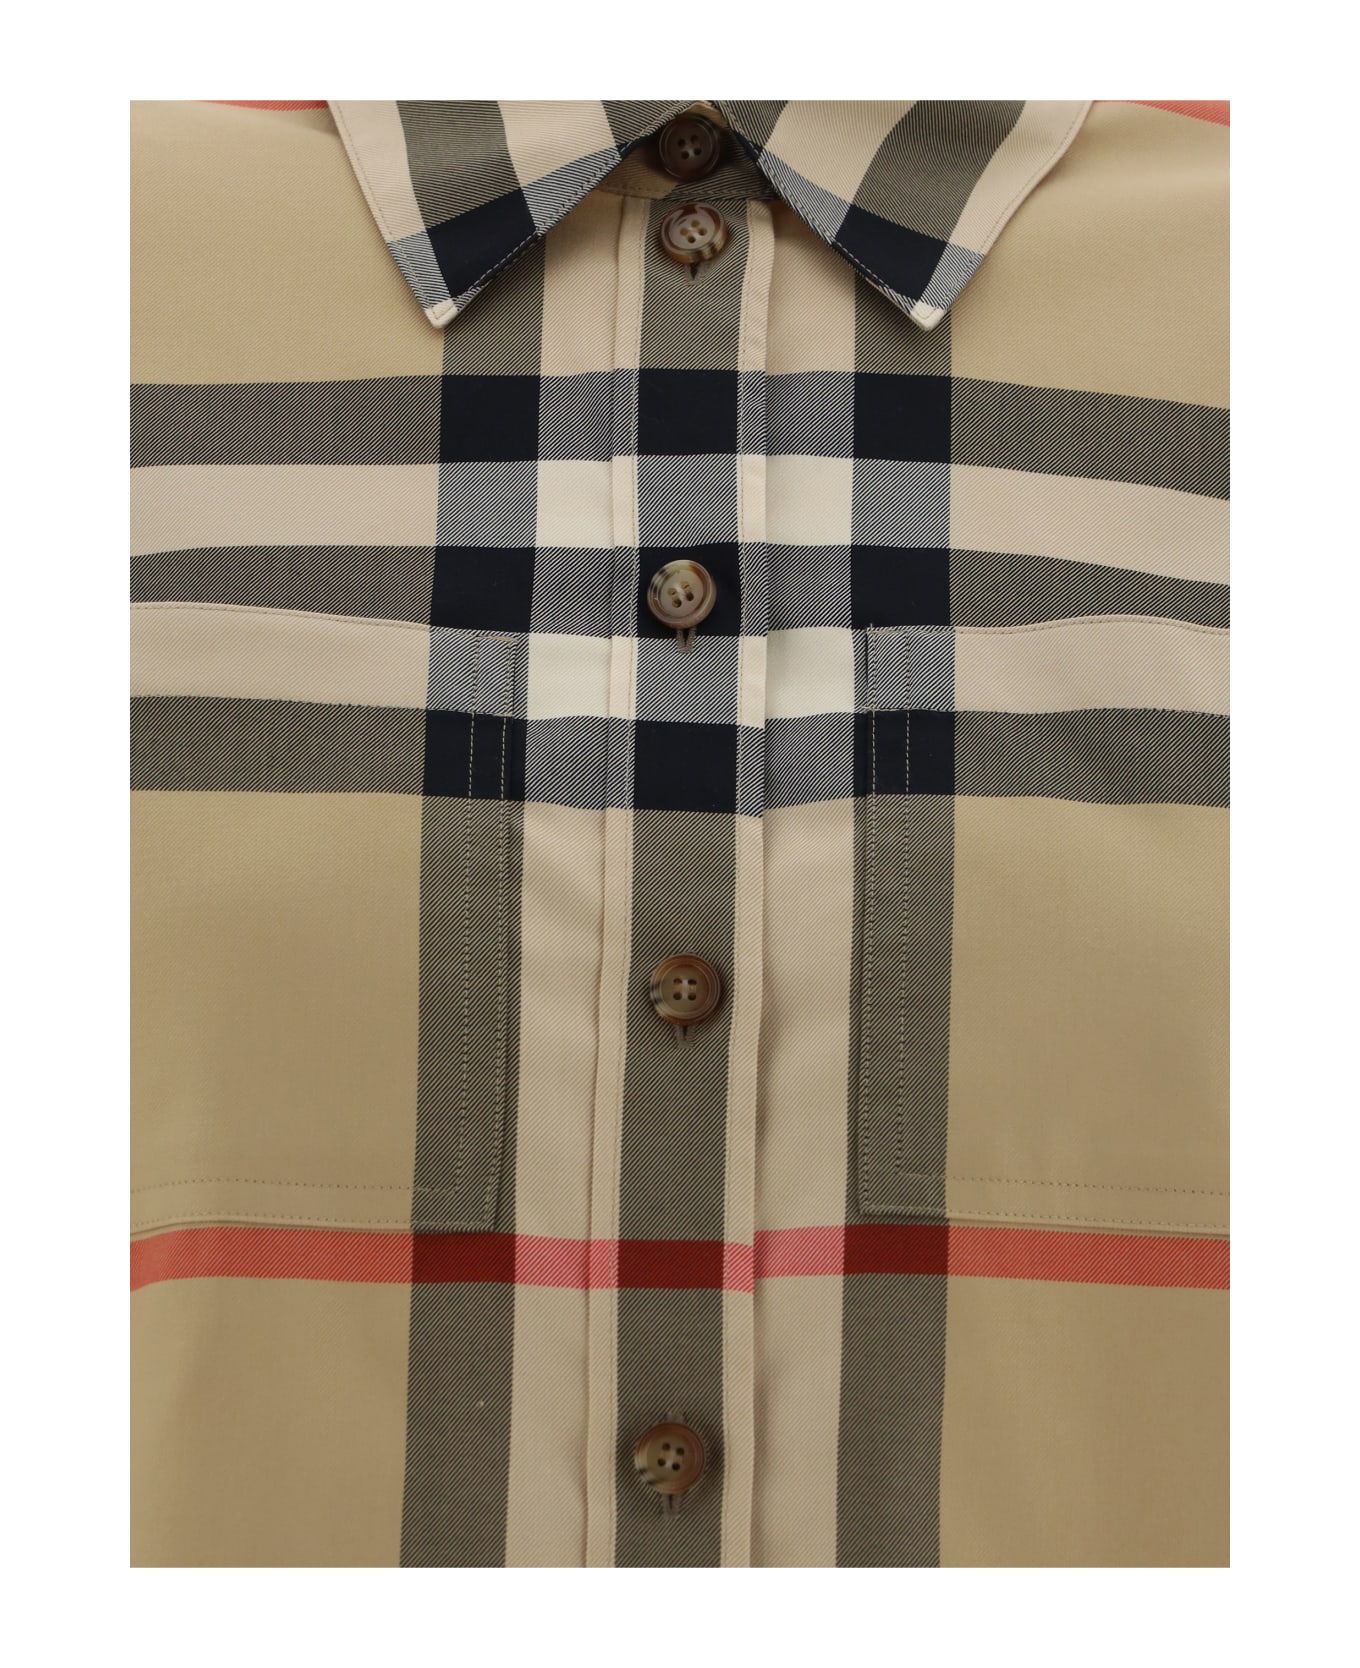 Burberry Paola Shirt - Archive Beige Ip Chk